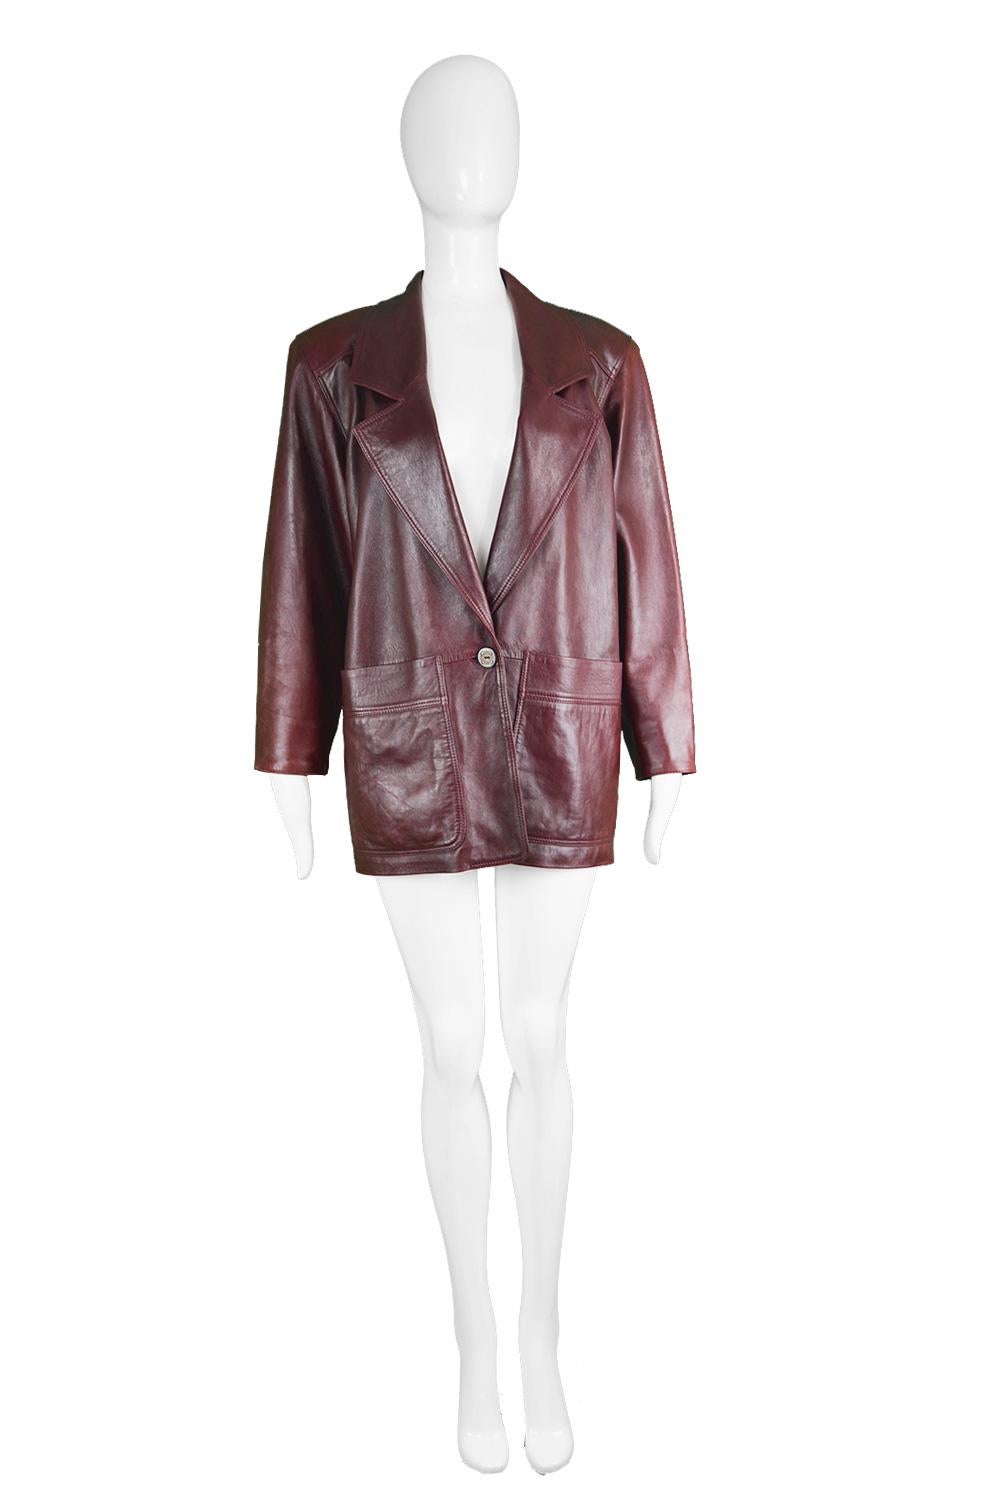 An edgy vintage women's leather jacket from the 80s by Spanish luxury fashion house, Loewe. In a dark red 'Bordeaux Wine' / oxblood leather with a single button engraved with the Loewe logo that fastens at the front. The structured shoulders give a